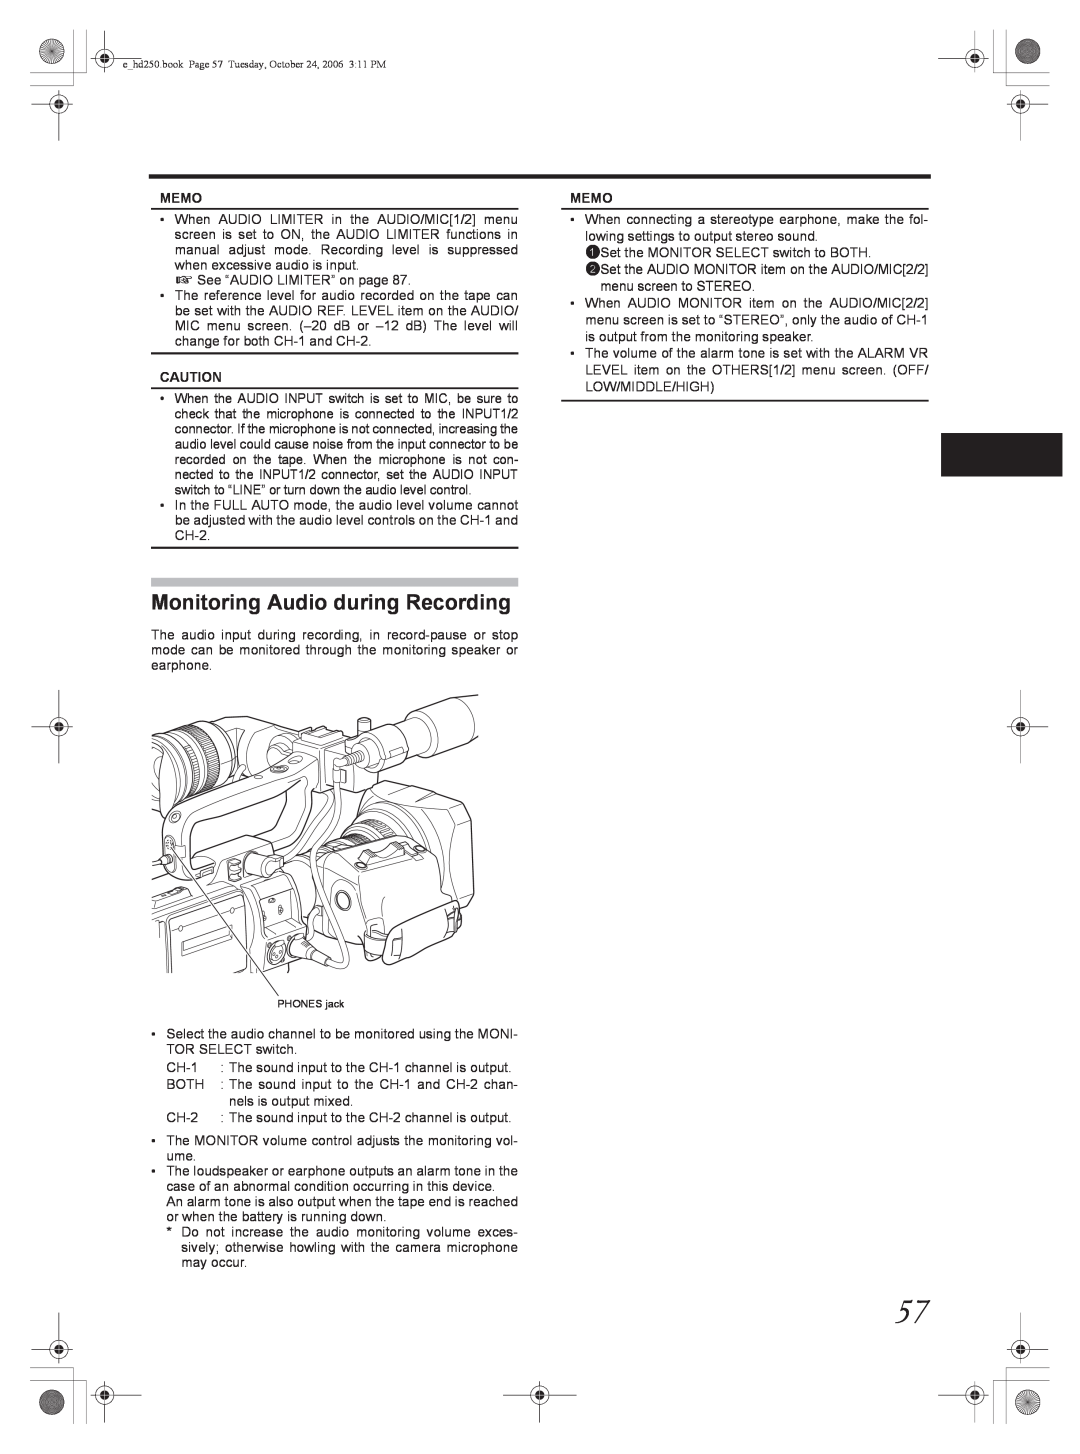 JVC GY-HD251, GY-HD250 manual Monitoring Audio during Recording, Memo, ehd250.book Page 57 Tuesday, October 24, 2006 311 PM 